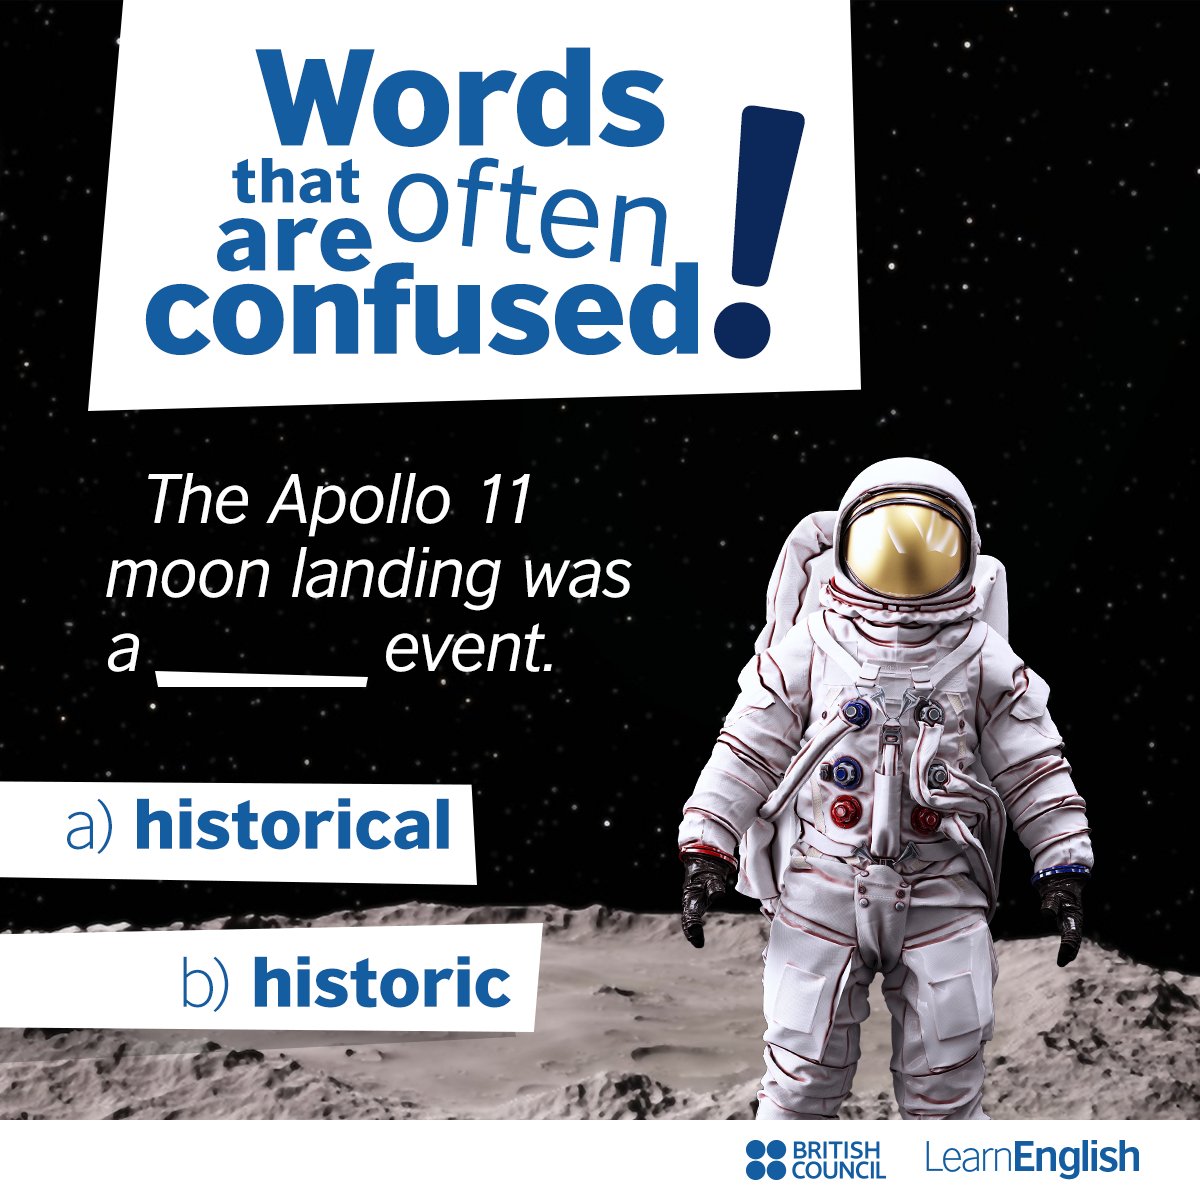 📷Do you know the answer? 🤔
Learn to speak English with confidence with the world’s English experts! Find out more here: bit.ly/EnglishOnline23
#Space #learningenglish #learnenglish #onlineenglish
#englishcourses #english #englishcourse
#englishonlineclass #grammar #vocabulary